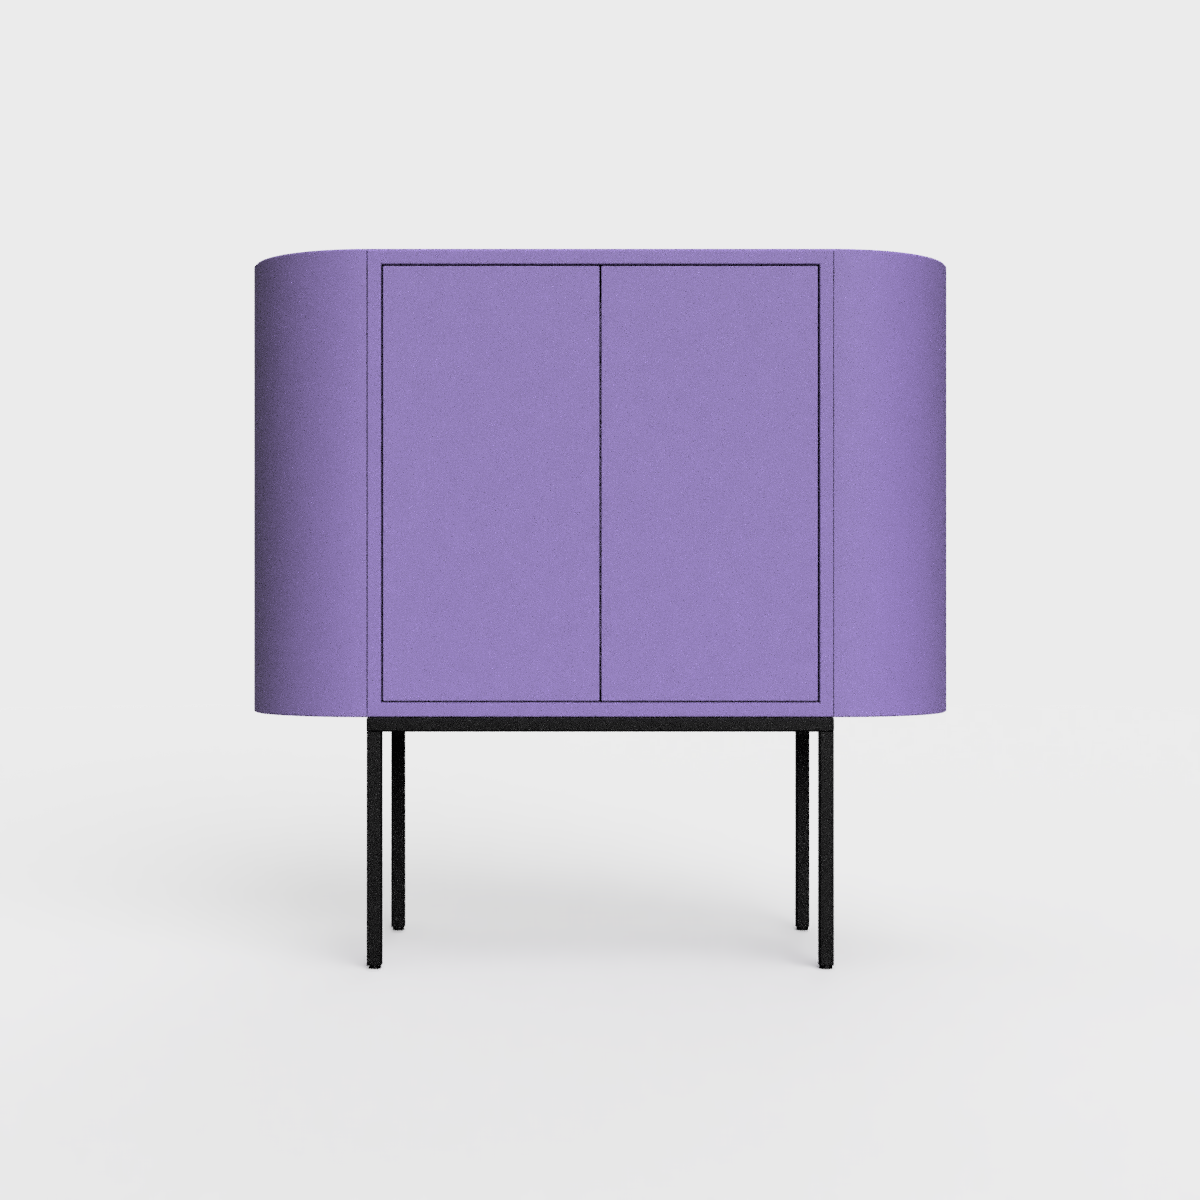 Siena 01 Sideboard in iris color, powder-coated steel, elegant and modern piece of furniture for your living room